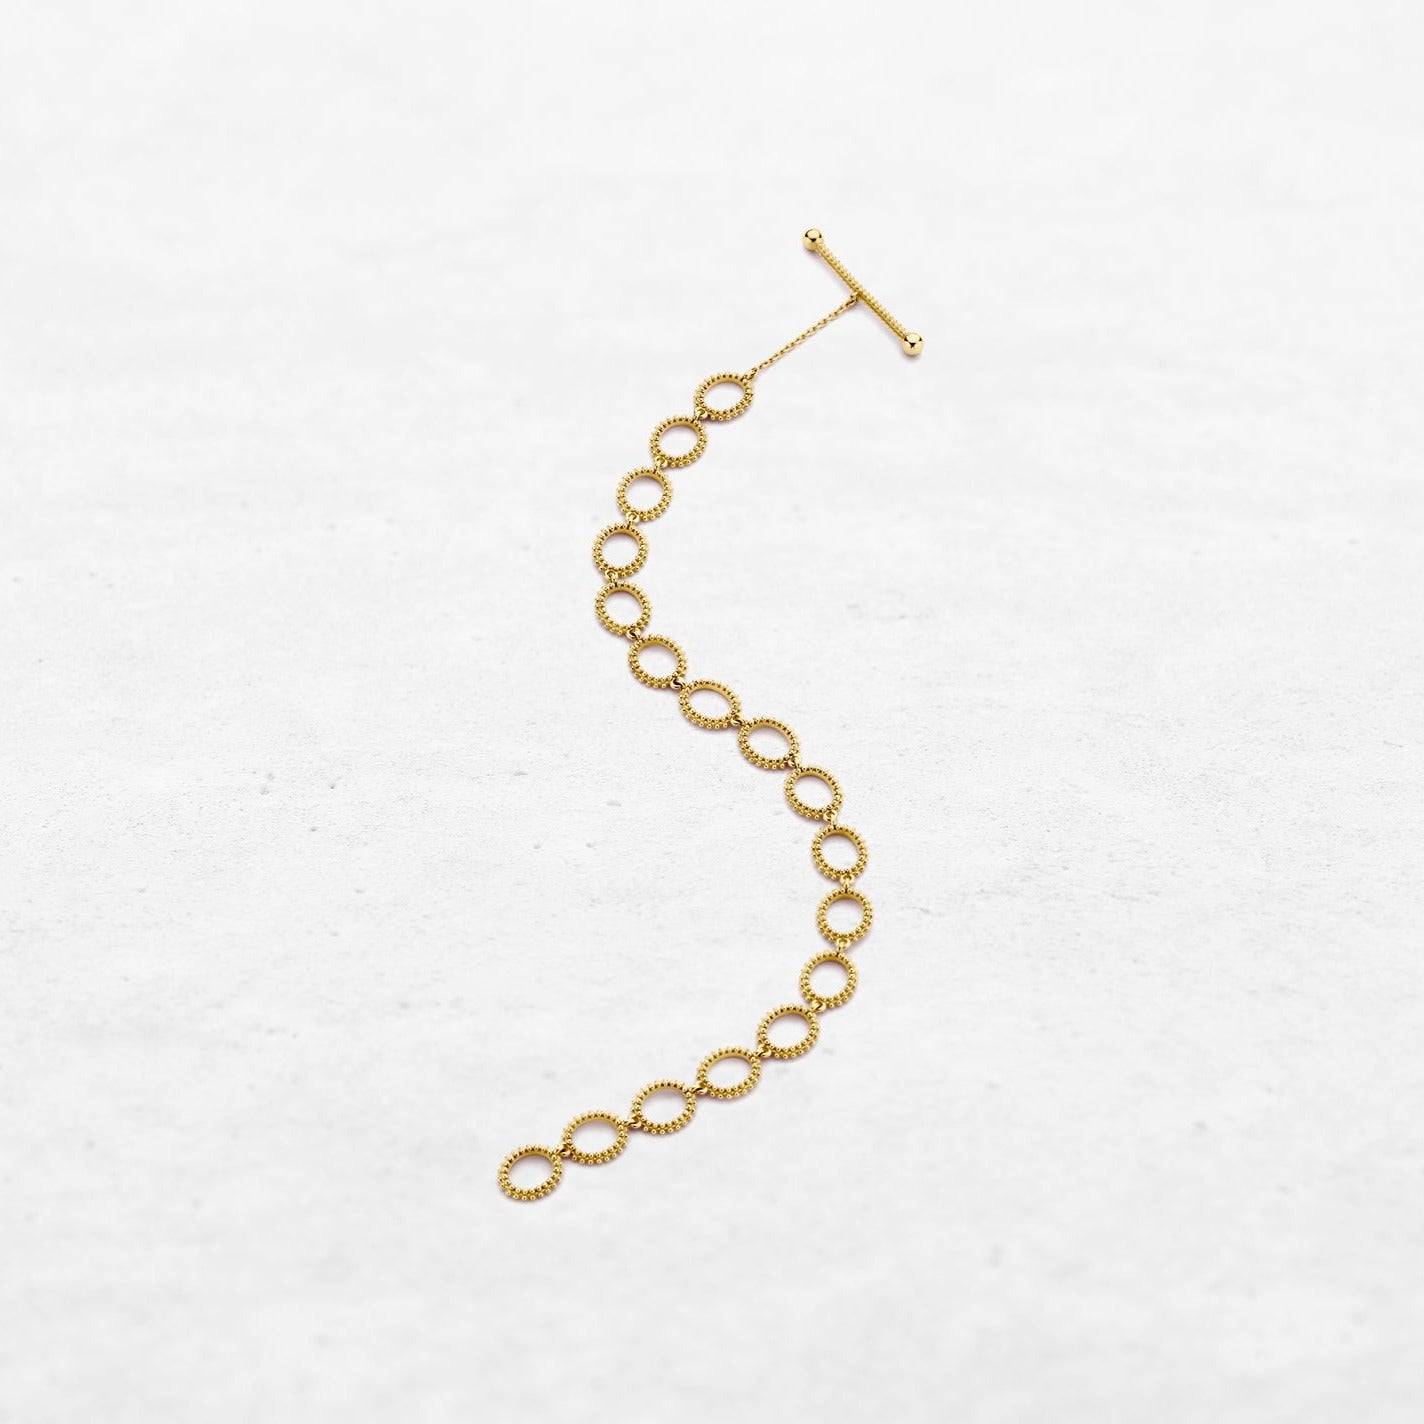 Circular bracelet in yellow gold made by O! Jewelry